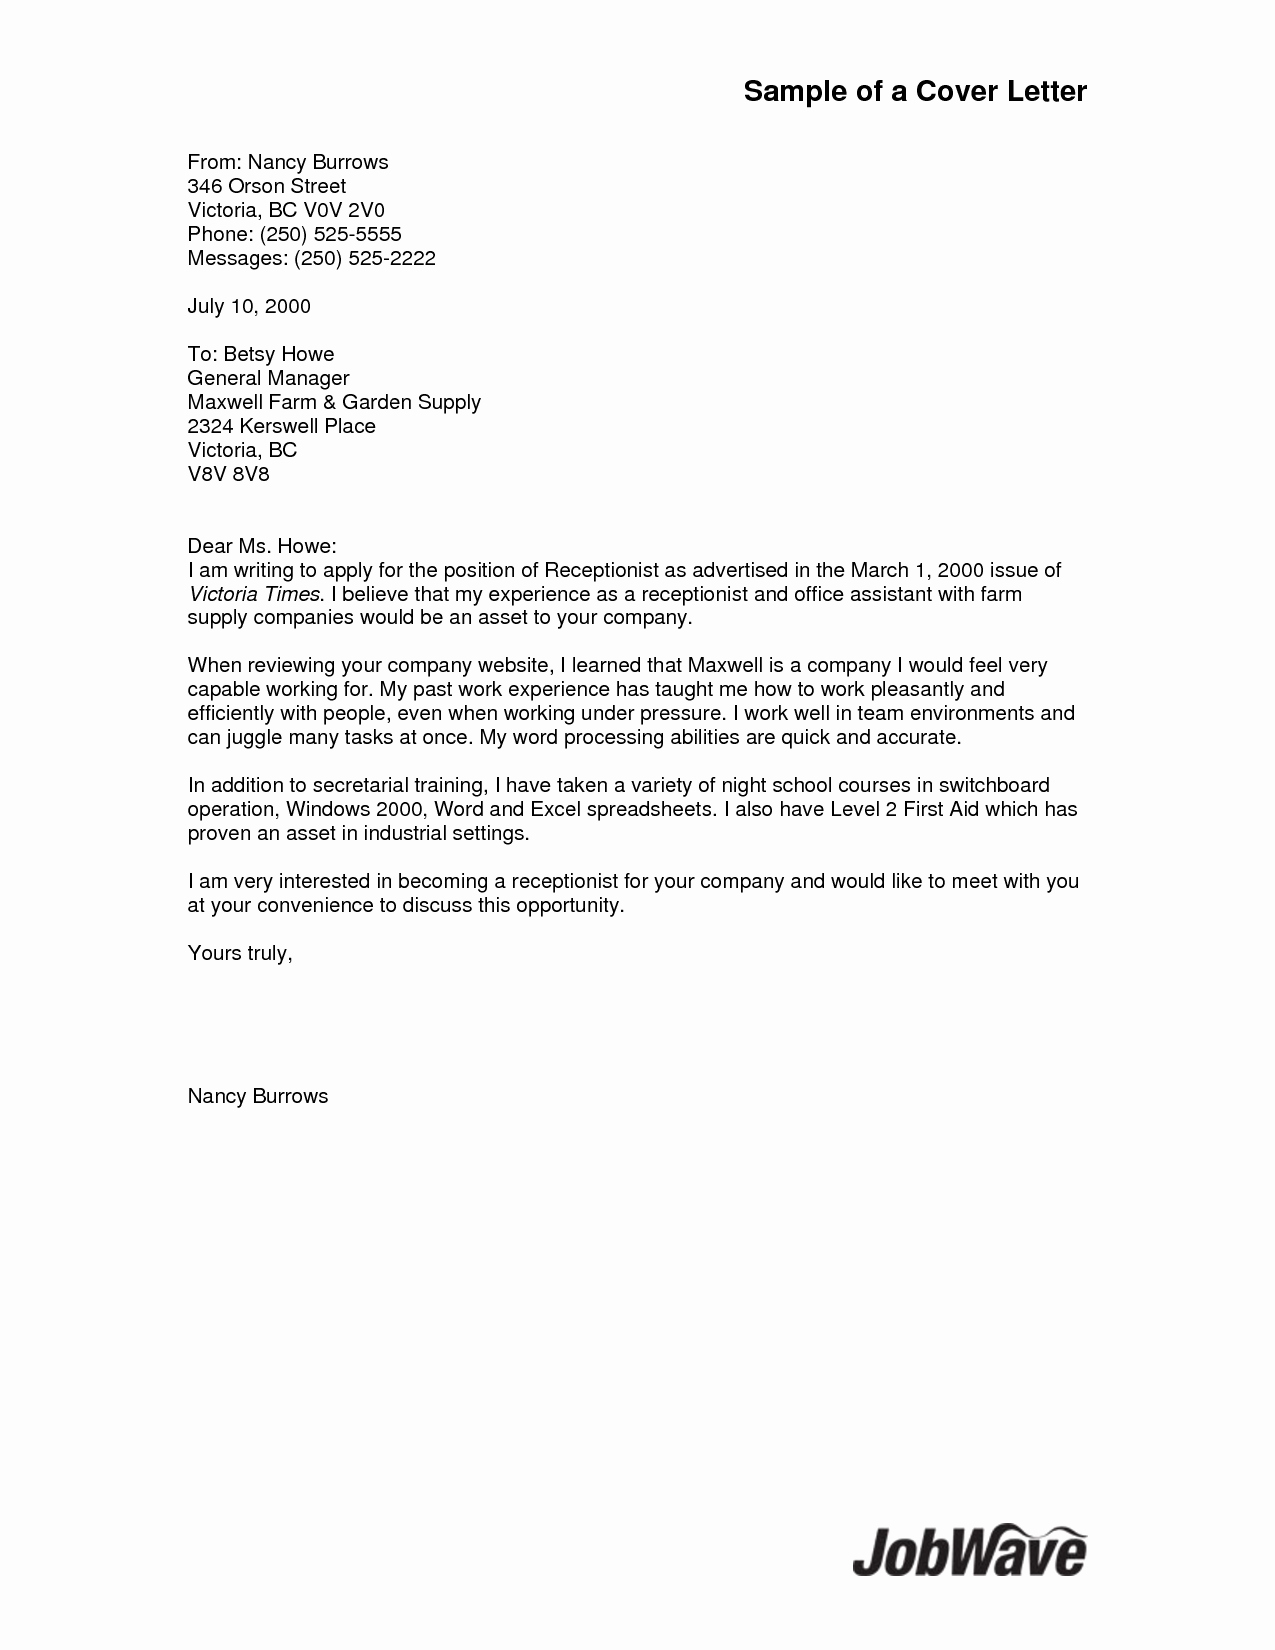 General Cover Letter Examples Fresh General Cover Letter Examples